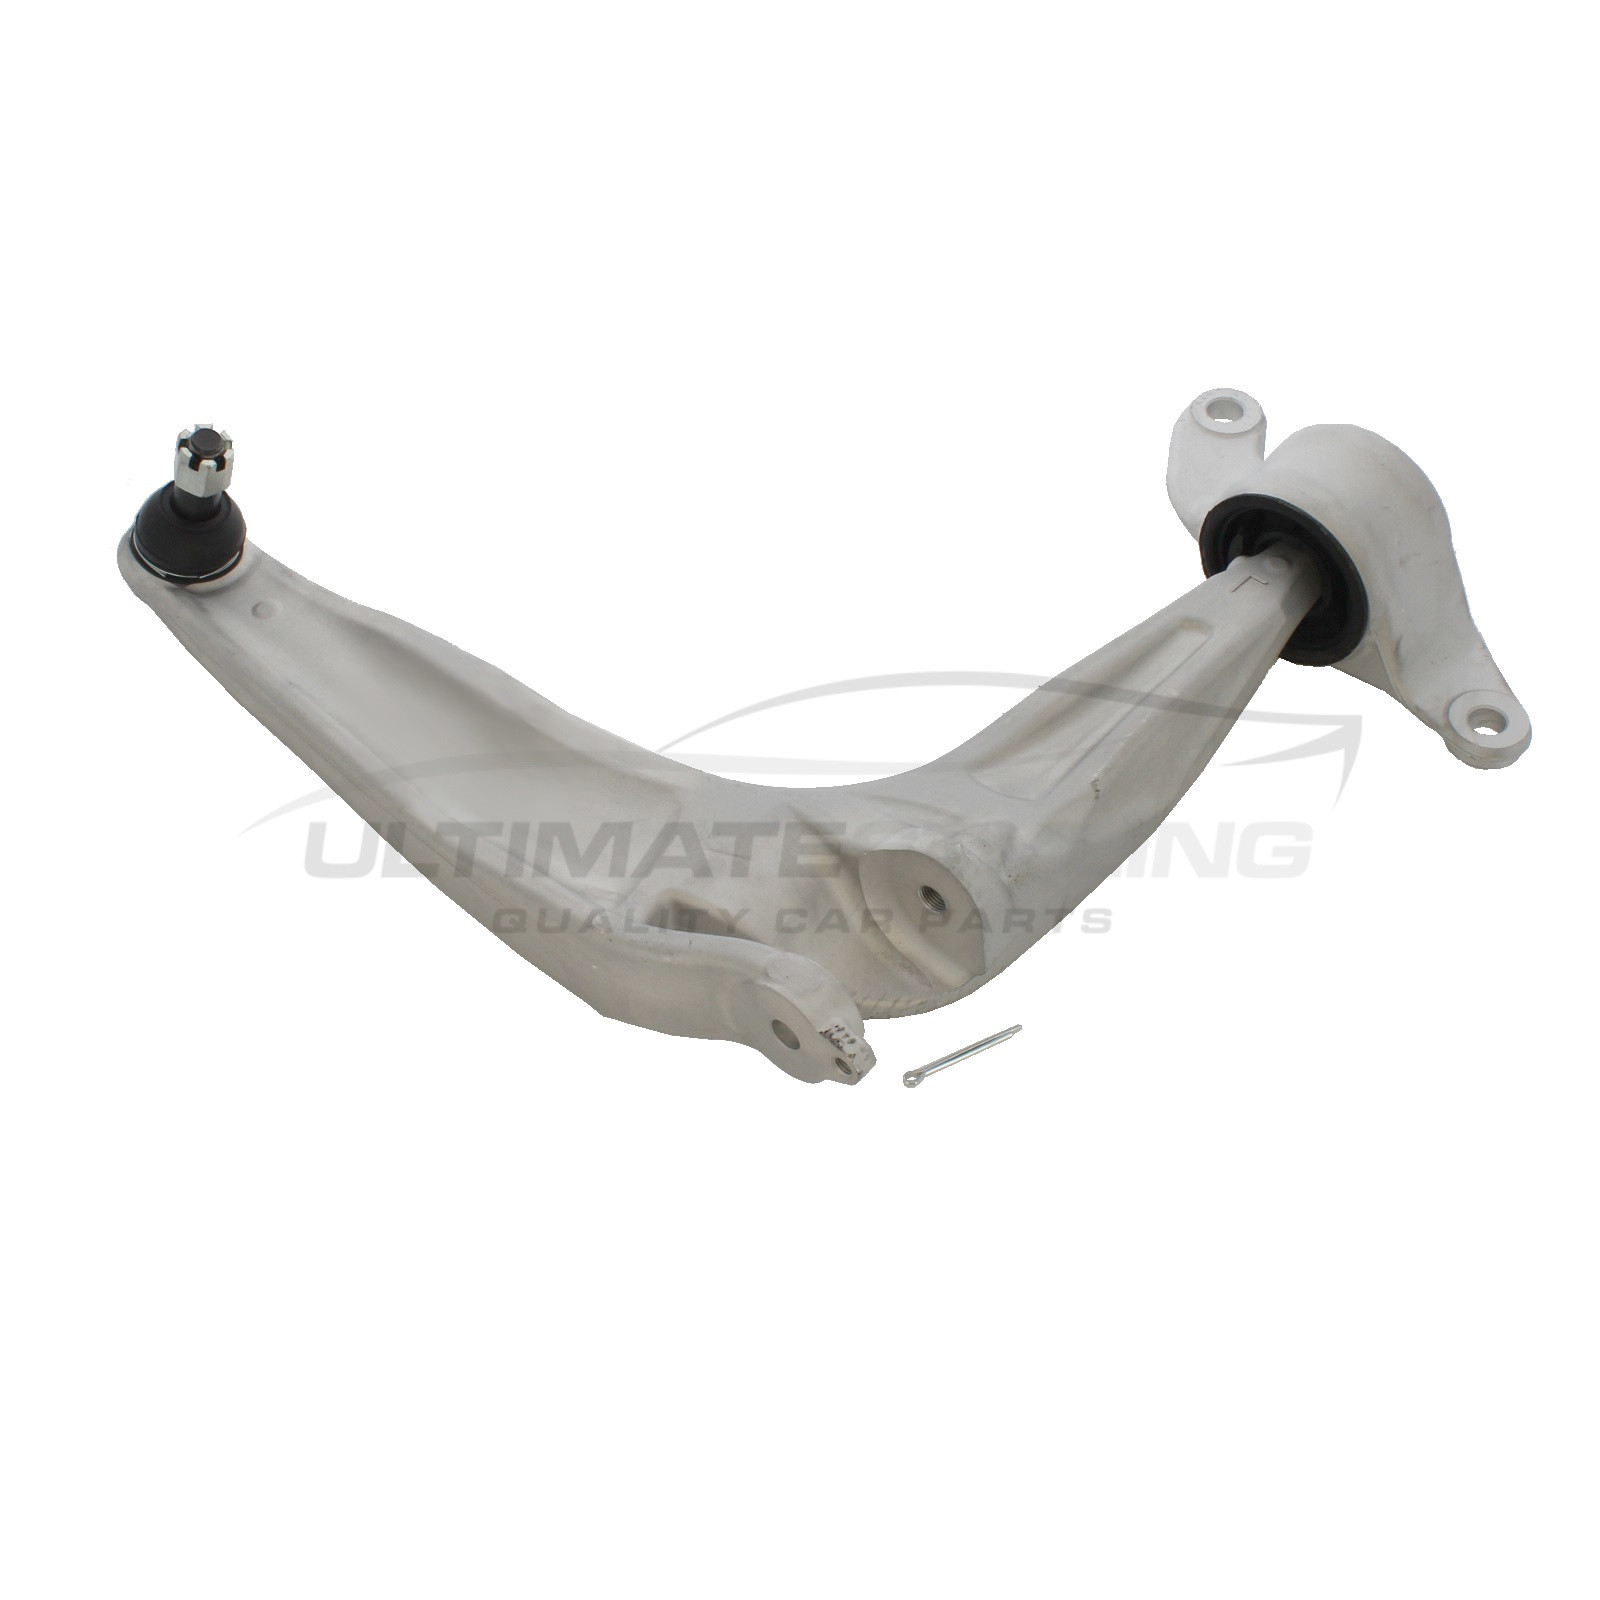 Honda Civic 2005-2012 Front Lower Suspension Arm (Alloy) Including Ball Joint and Rear Bush Driver Side (RH)